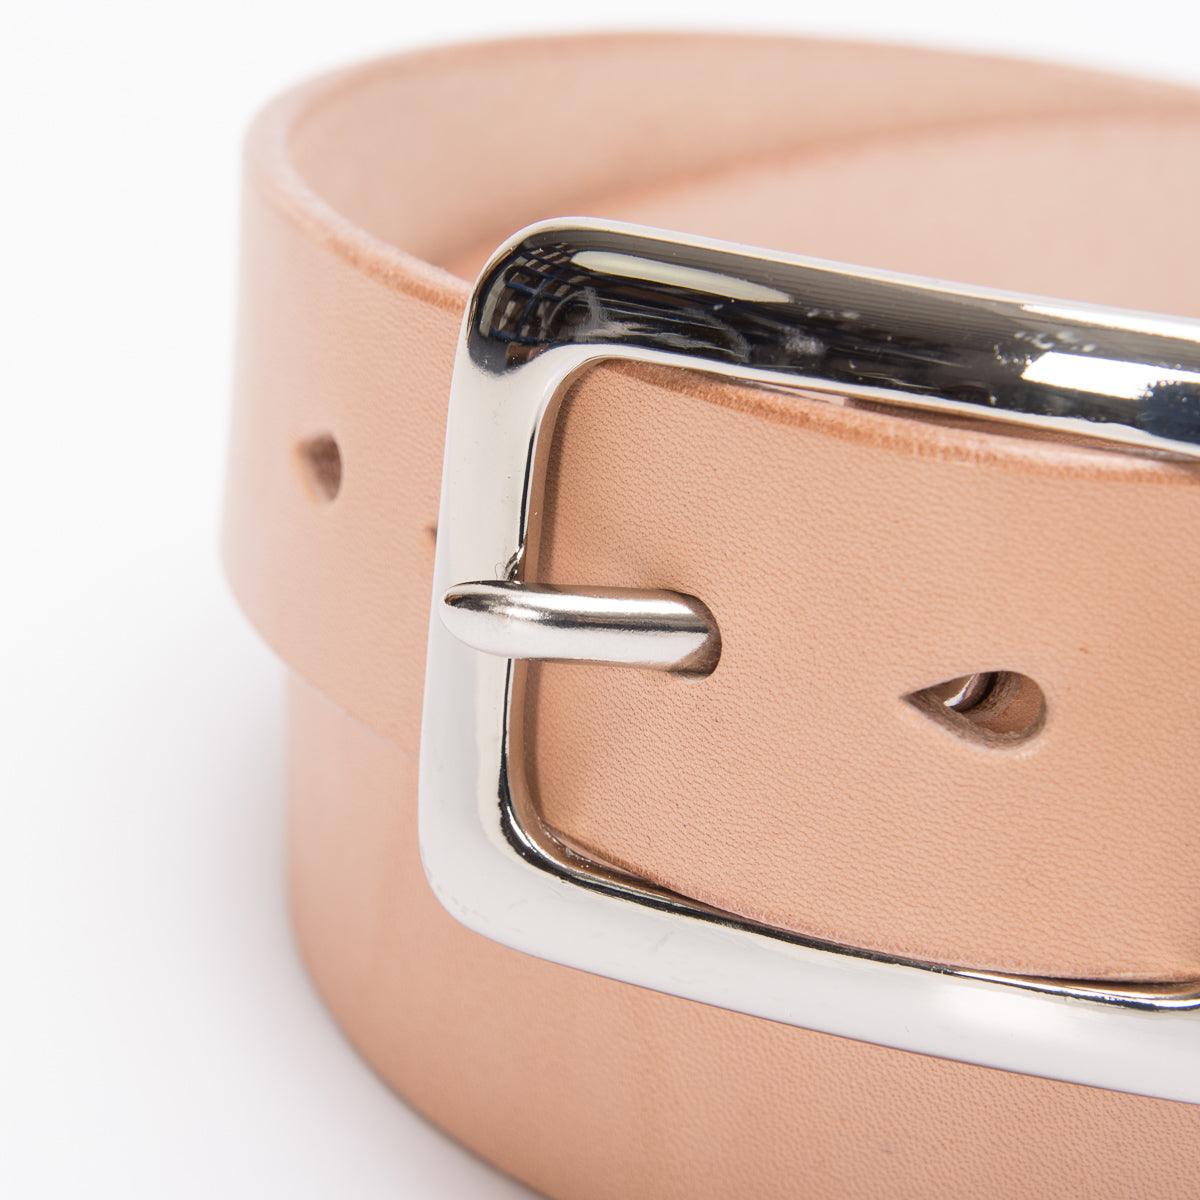 IHB-08-NAT - Heavy Duty "Tochigi" Leather Belt With Nickel Plated Garrison Buckle - Natural